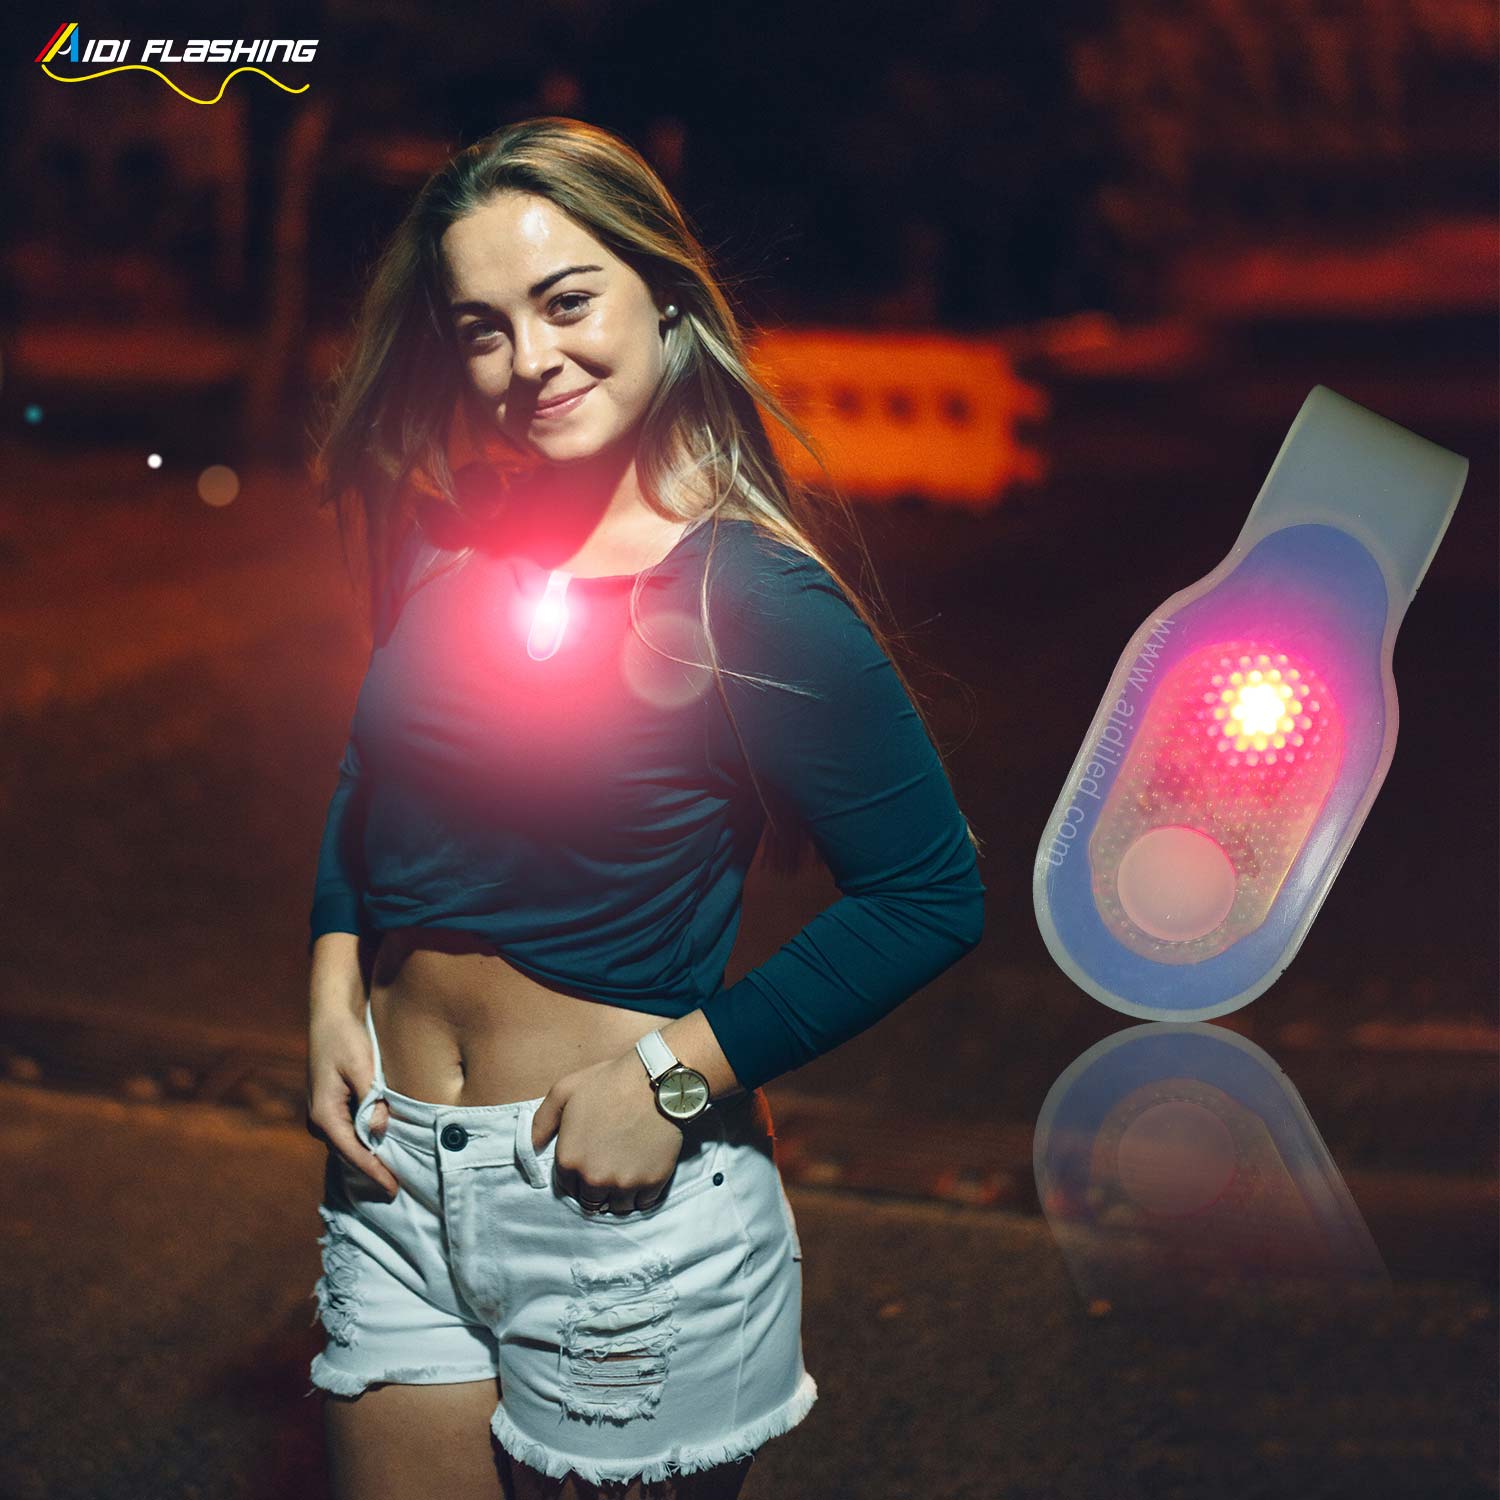 waterproof USB rechargeable LED magnet clip safety lights for runners AIDI-S5